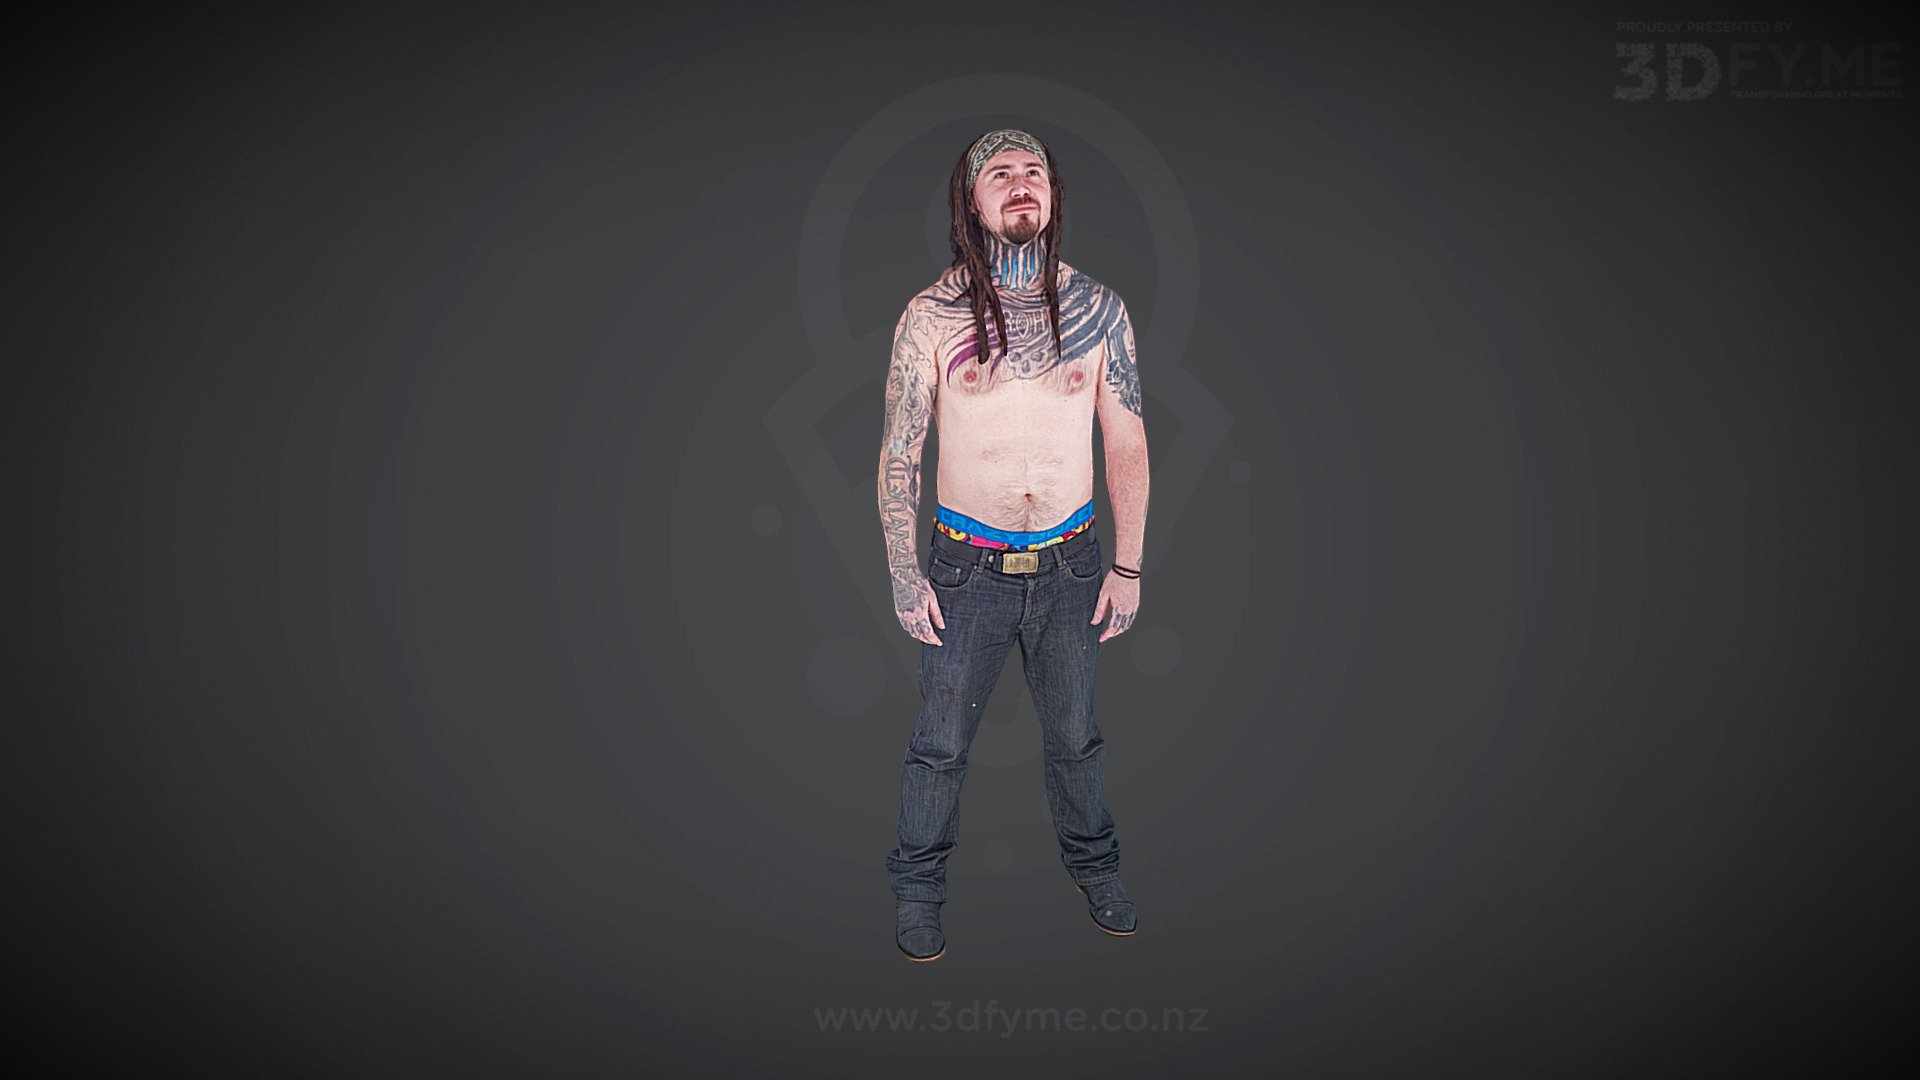 Photogrammetry raw scan, 140 pics (8 MP), decimated, texture re-projected (raw diffuse map, 8k) - Norton, Wellington Tattoo Convention 2021 - 3D model by 3Dfy.me New Zealand (@smacher2016) 3d model